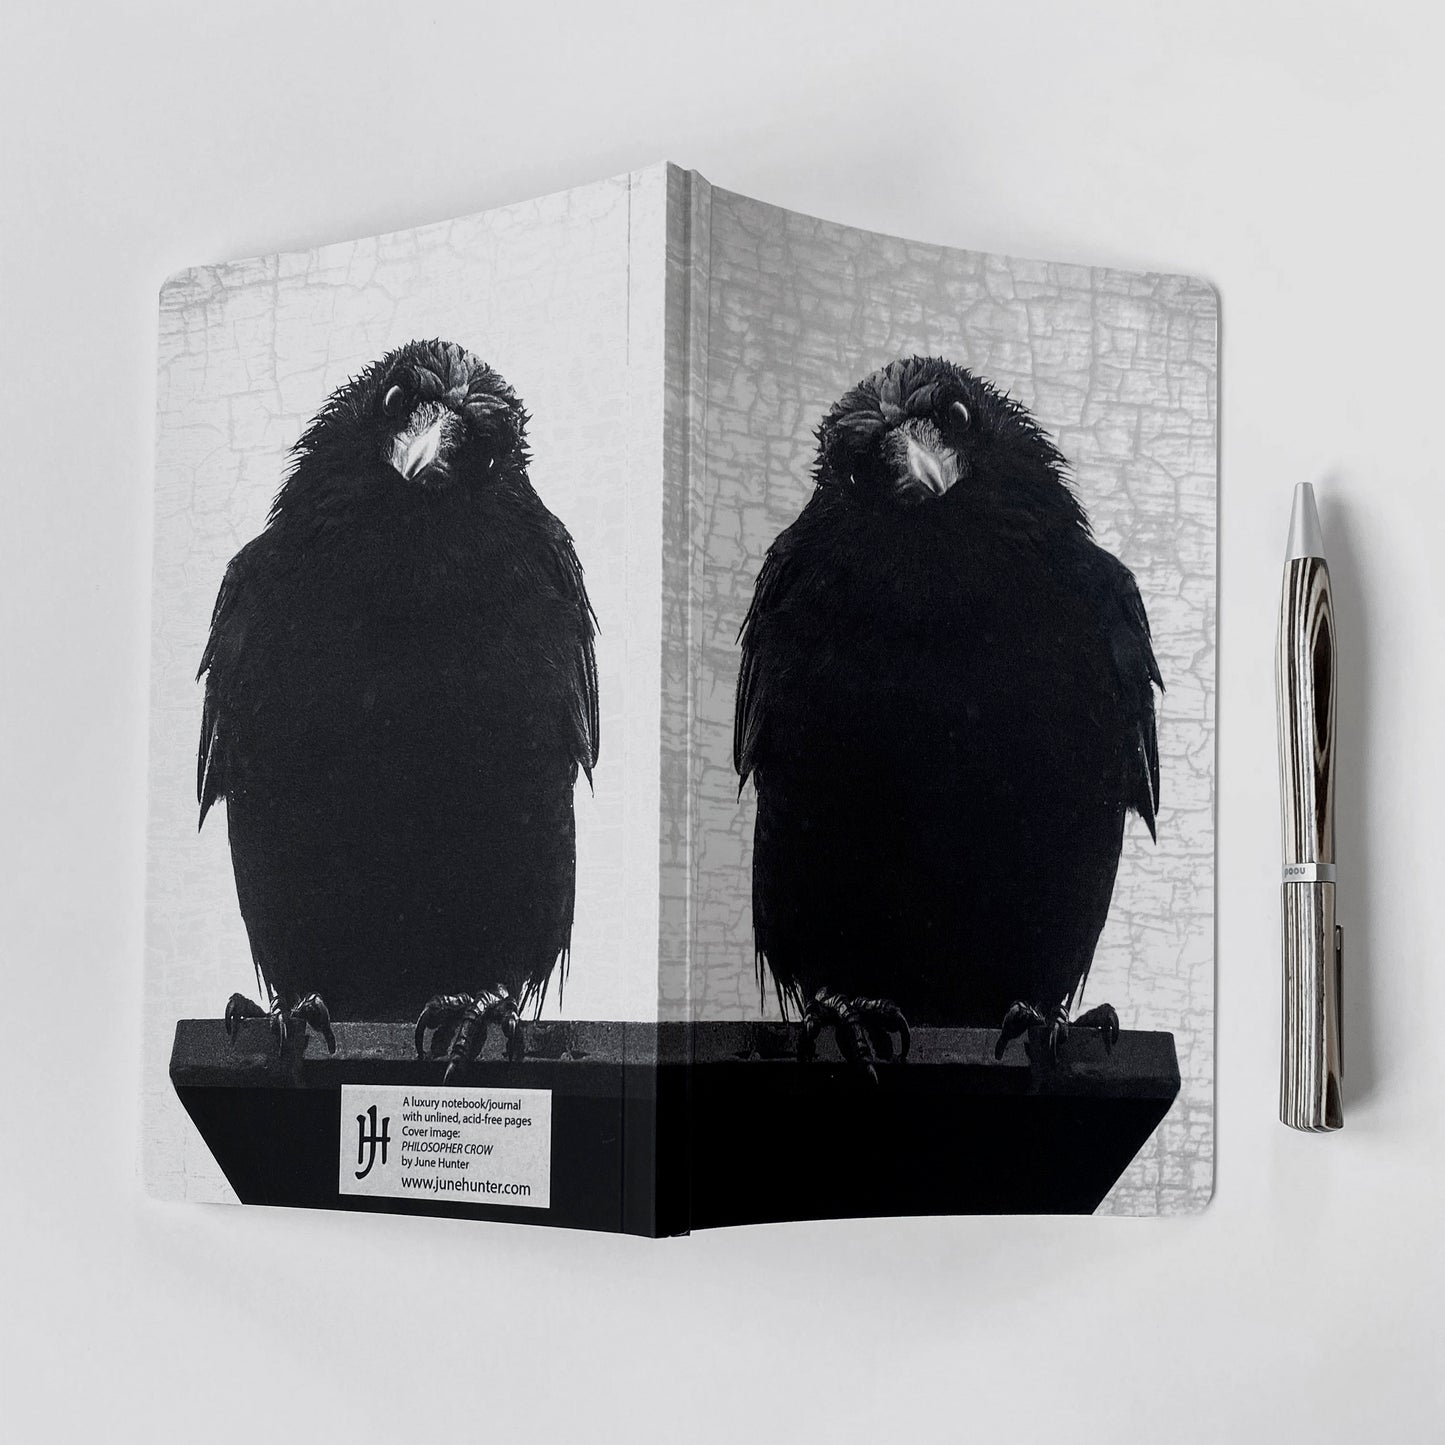 PHILOSOPHER CROW - Small Notebook by June Hunter